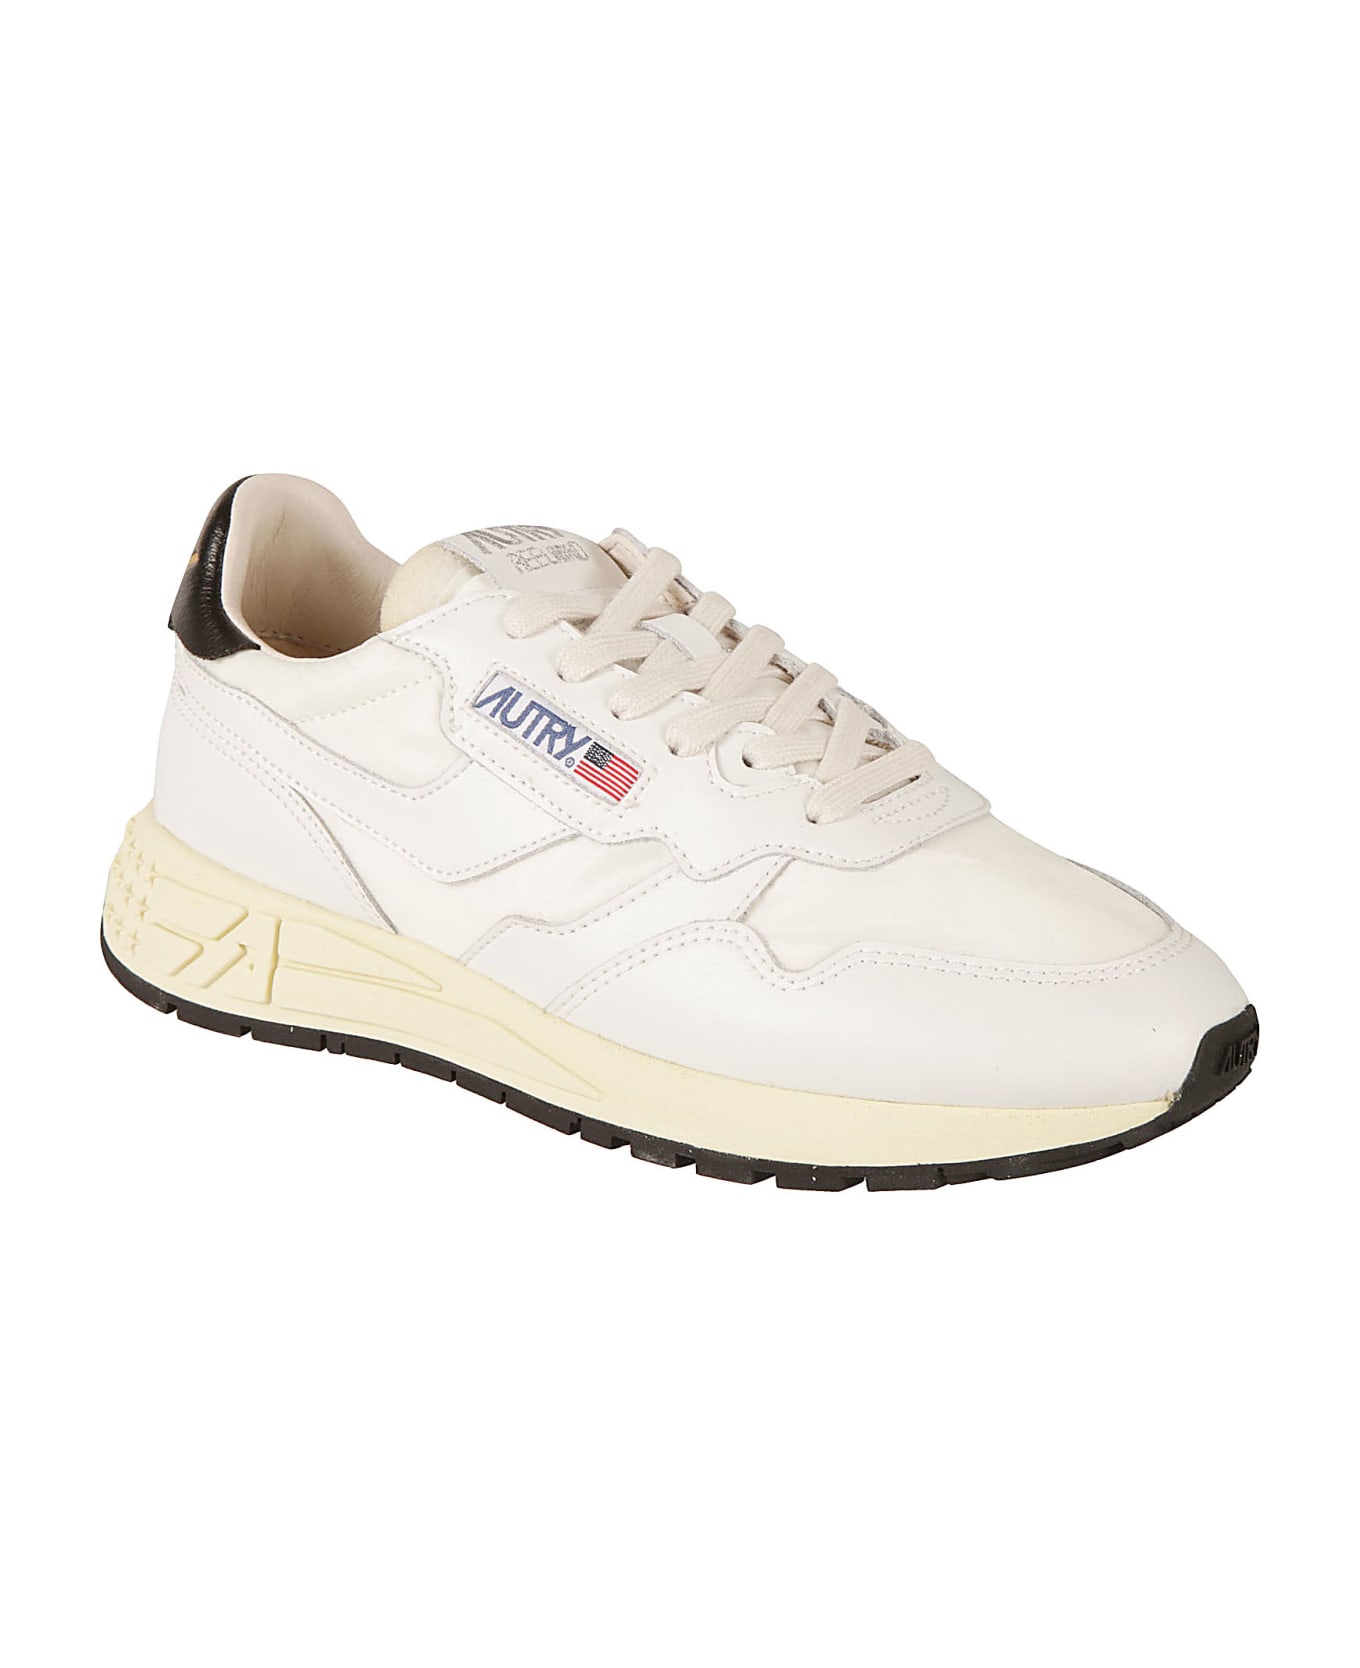 Autry Logo Patched Sneakers - White/white